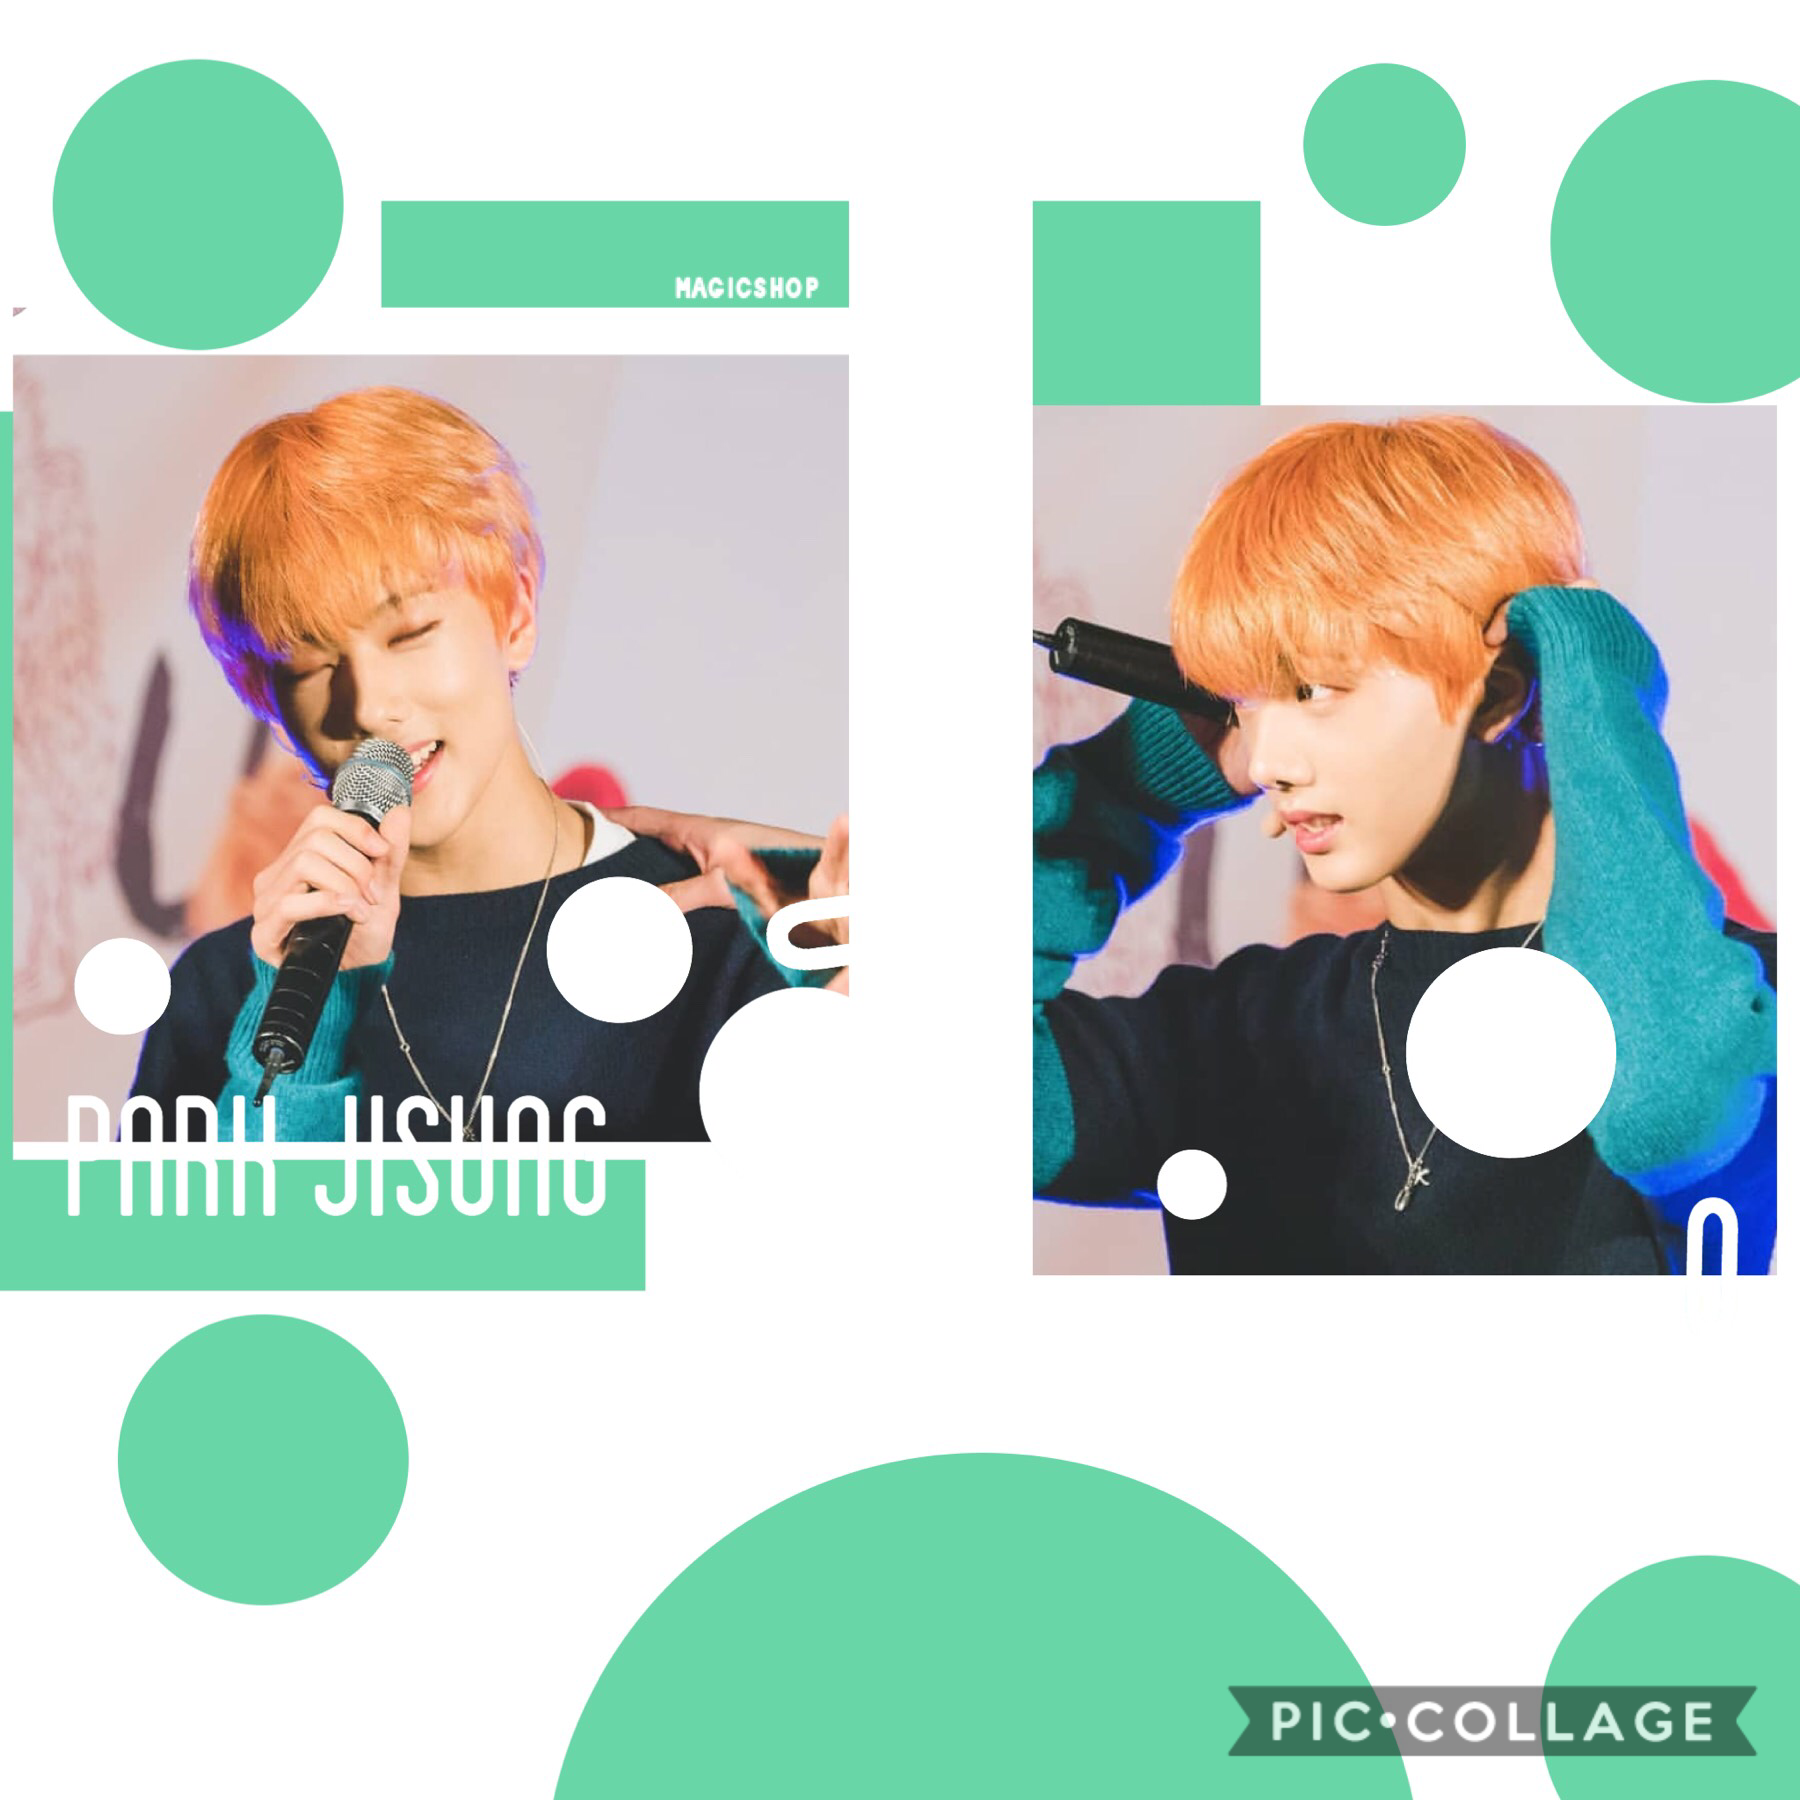 he’s so cute uwu 💕 also nct is going to the jimmy show thing so congrats to themmm 🎉🎉
        | |                      | | 
i feel like the quality of my edits are going downnn cause they’re so simple and :(  